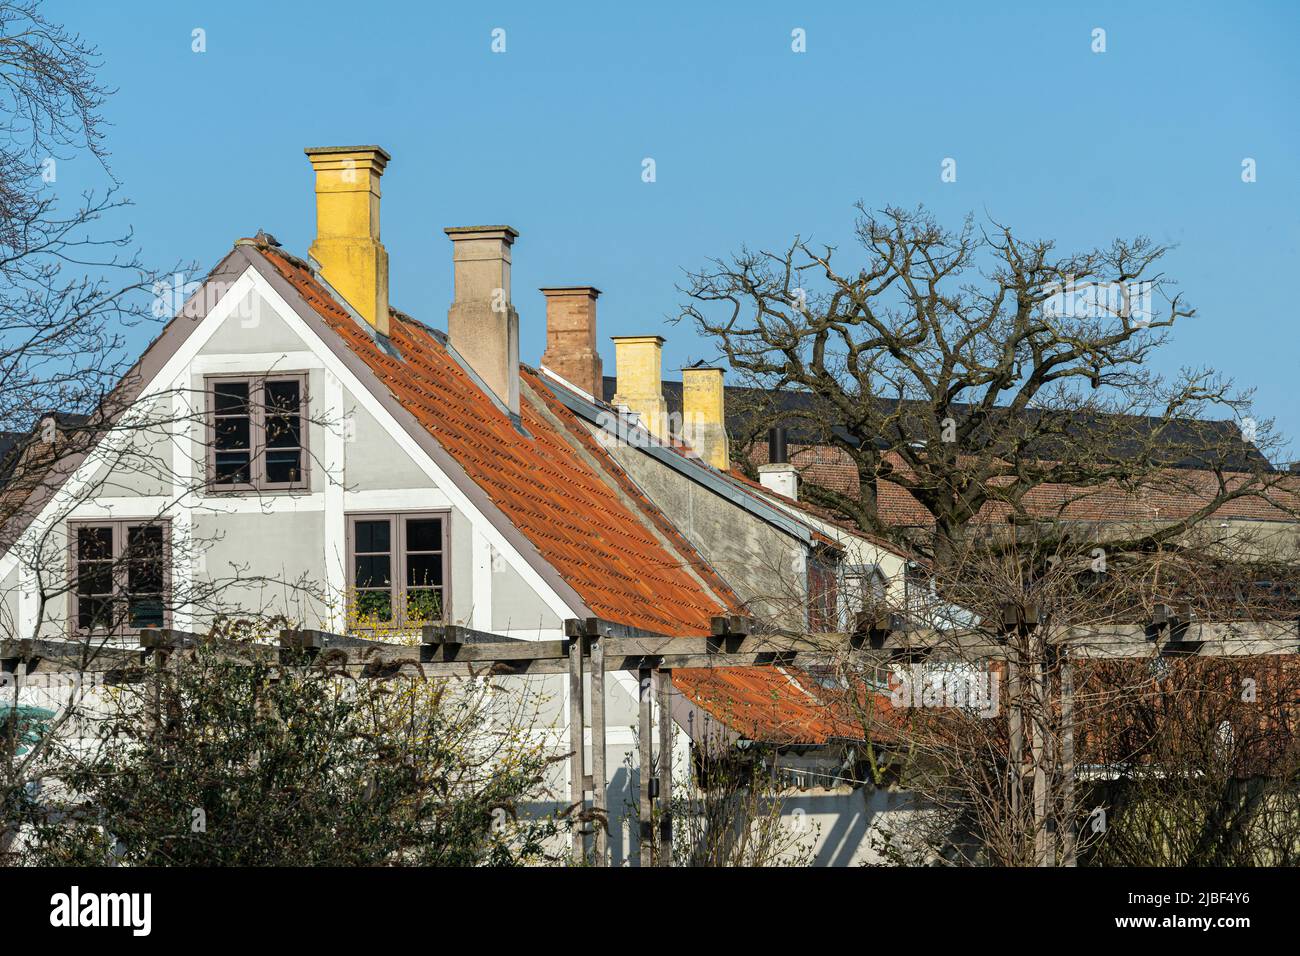 Classic Danish housing architecture with chimneys and pitched roofs. Odense, Denmark, Europe Stock Photo